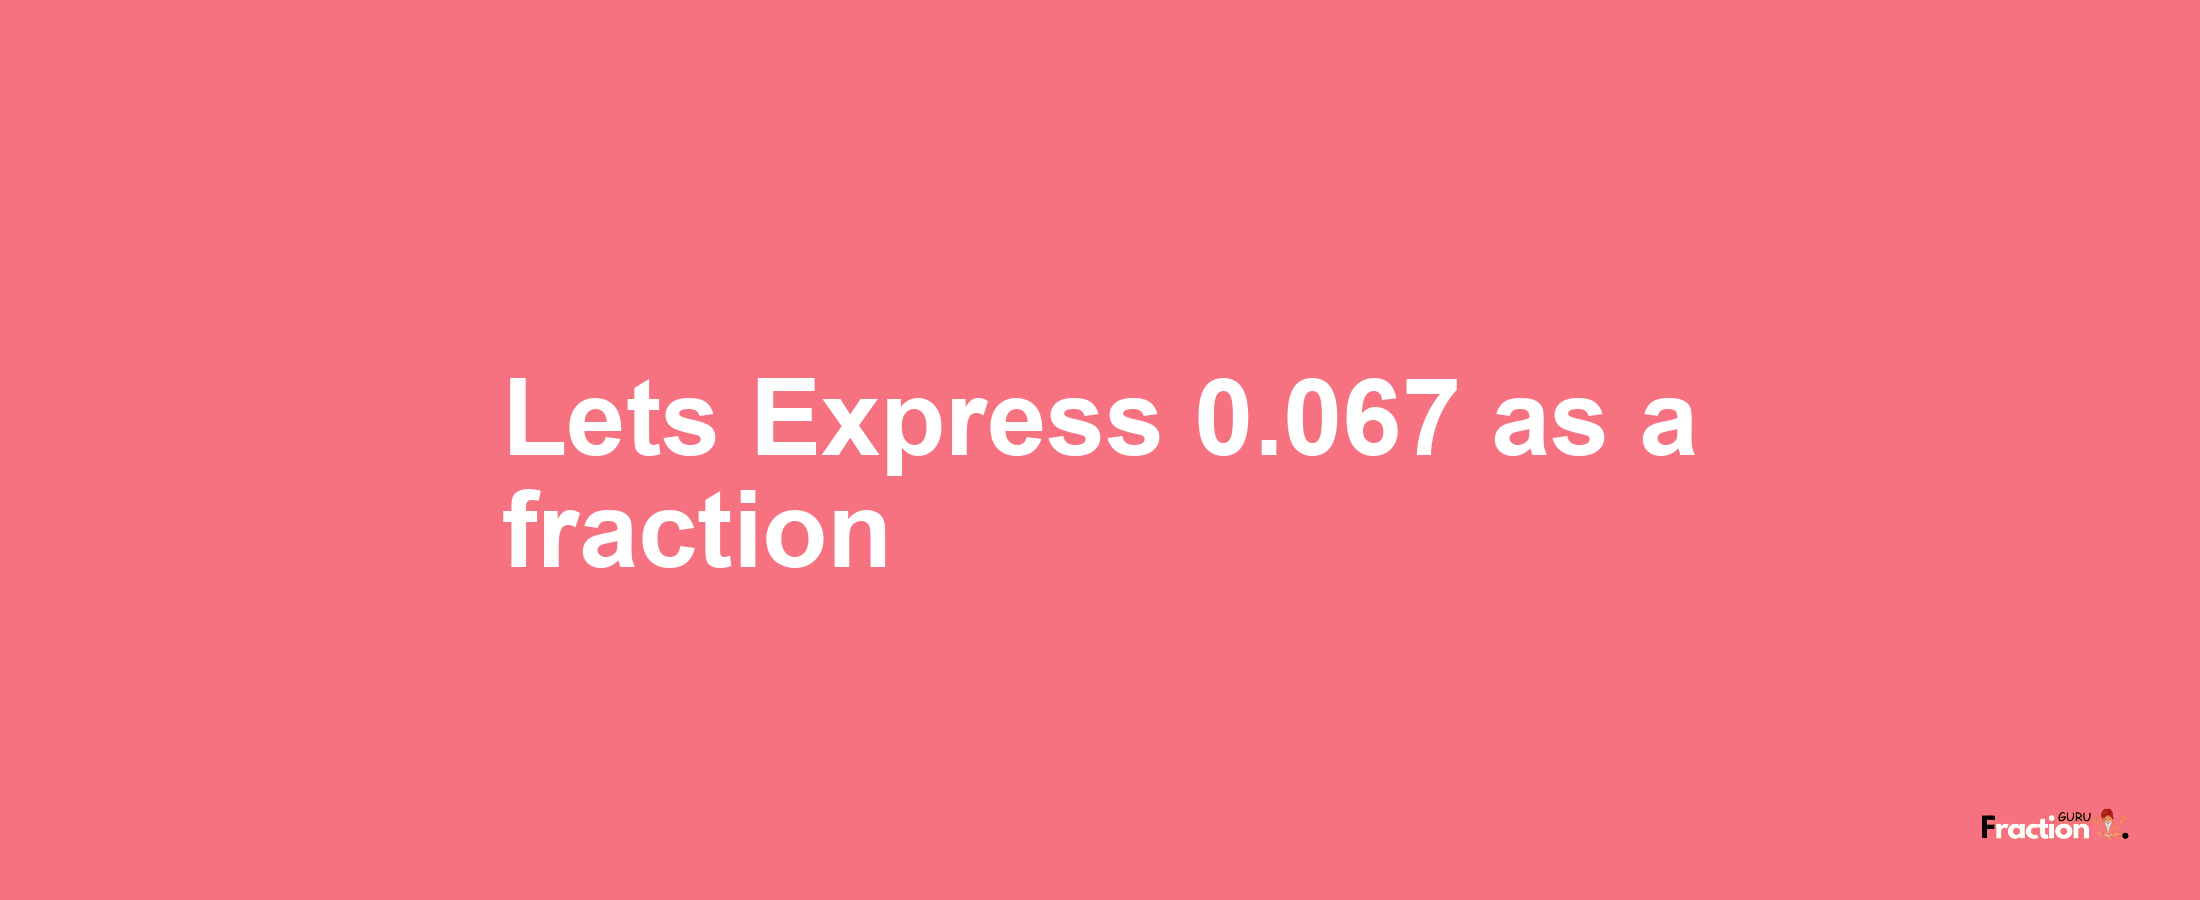 Lets Express 0.067 as afraction